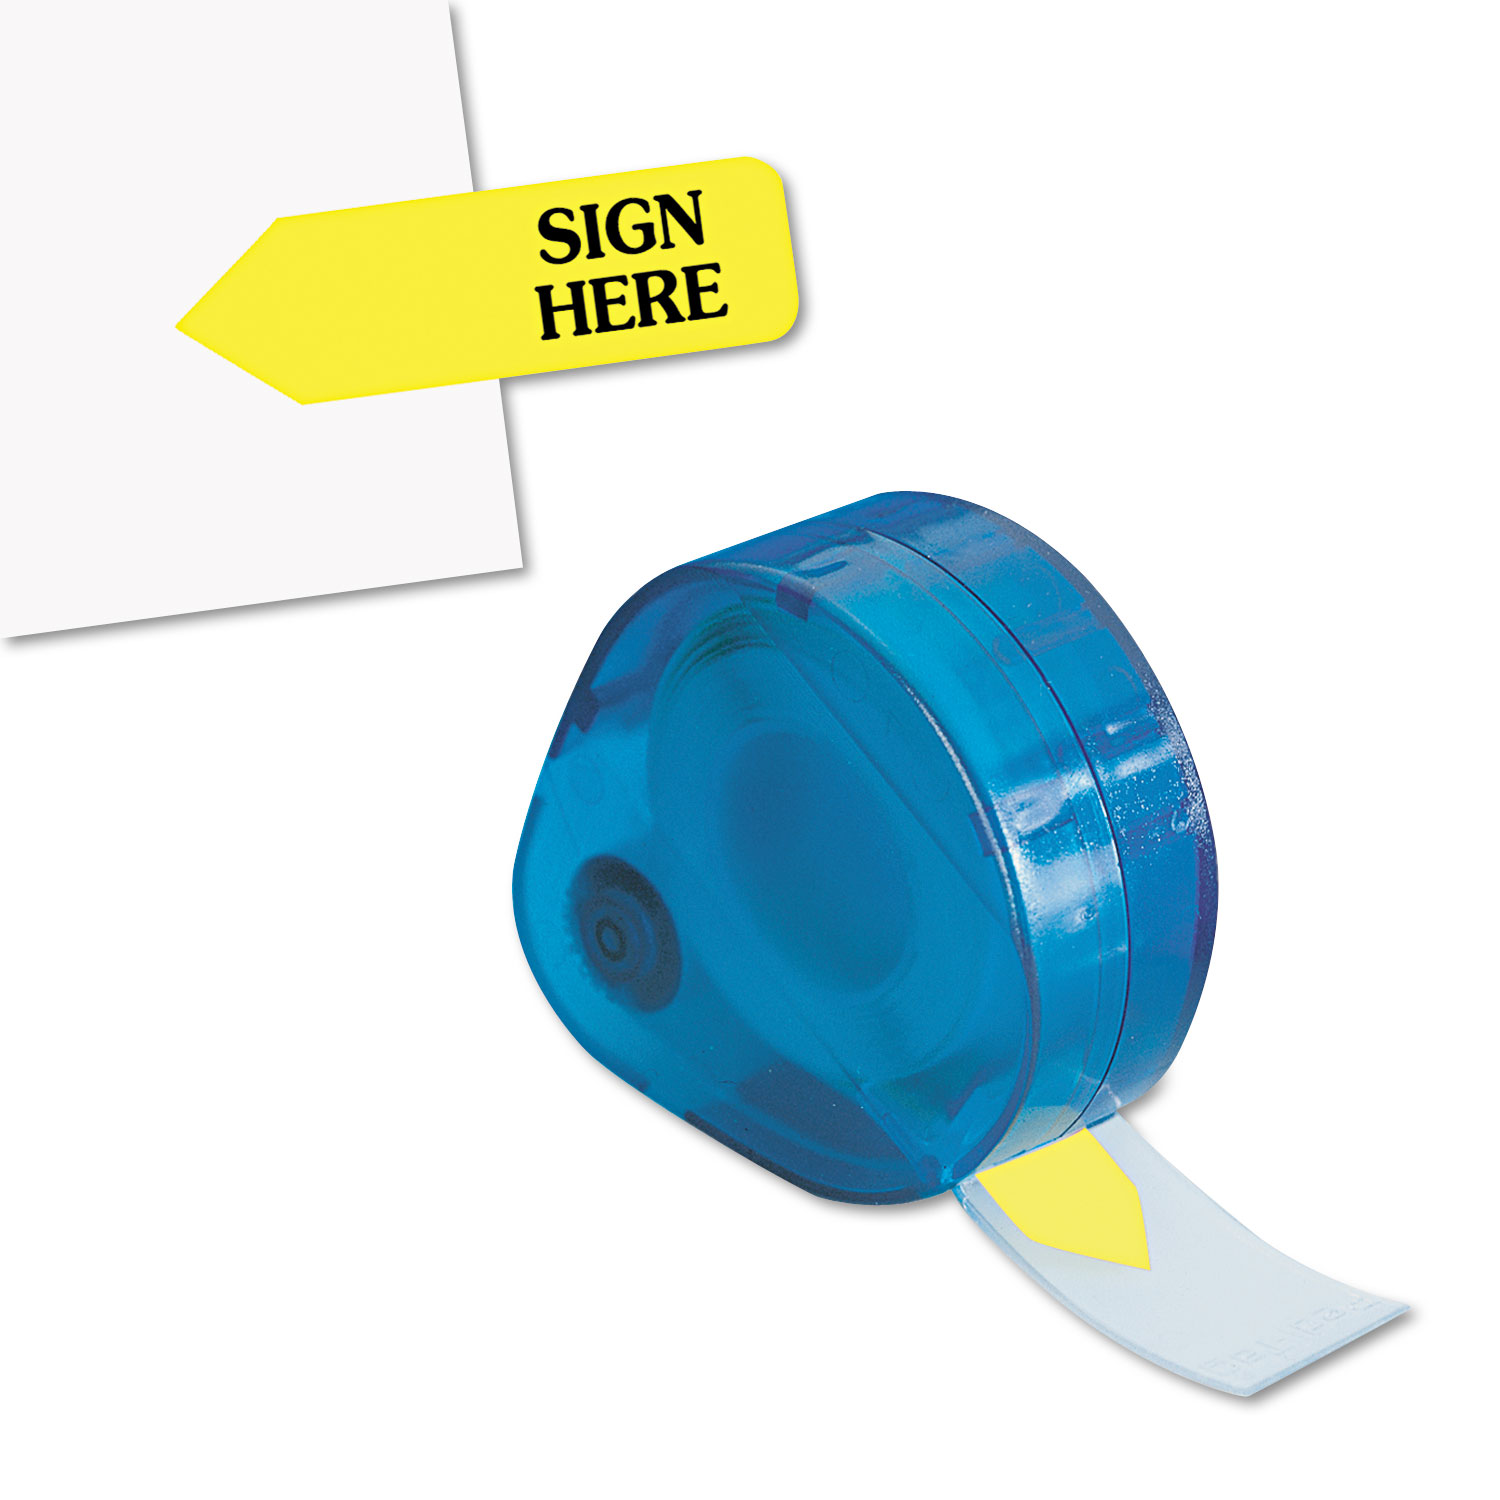  Redi-Tag 81014 Arrow Message Page Flags in Dispenser, Sign Here, Yellow, 120 Flags/Dispenser (RTG81014) 